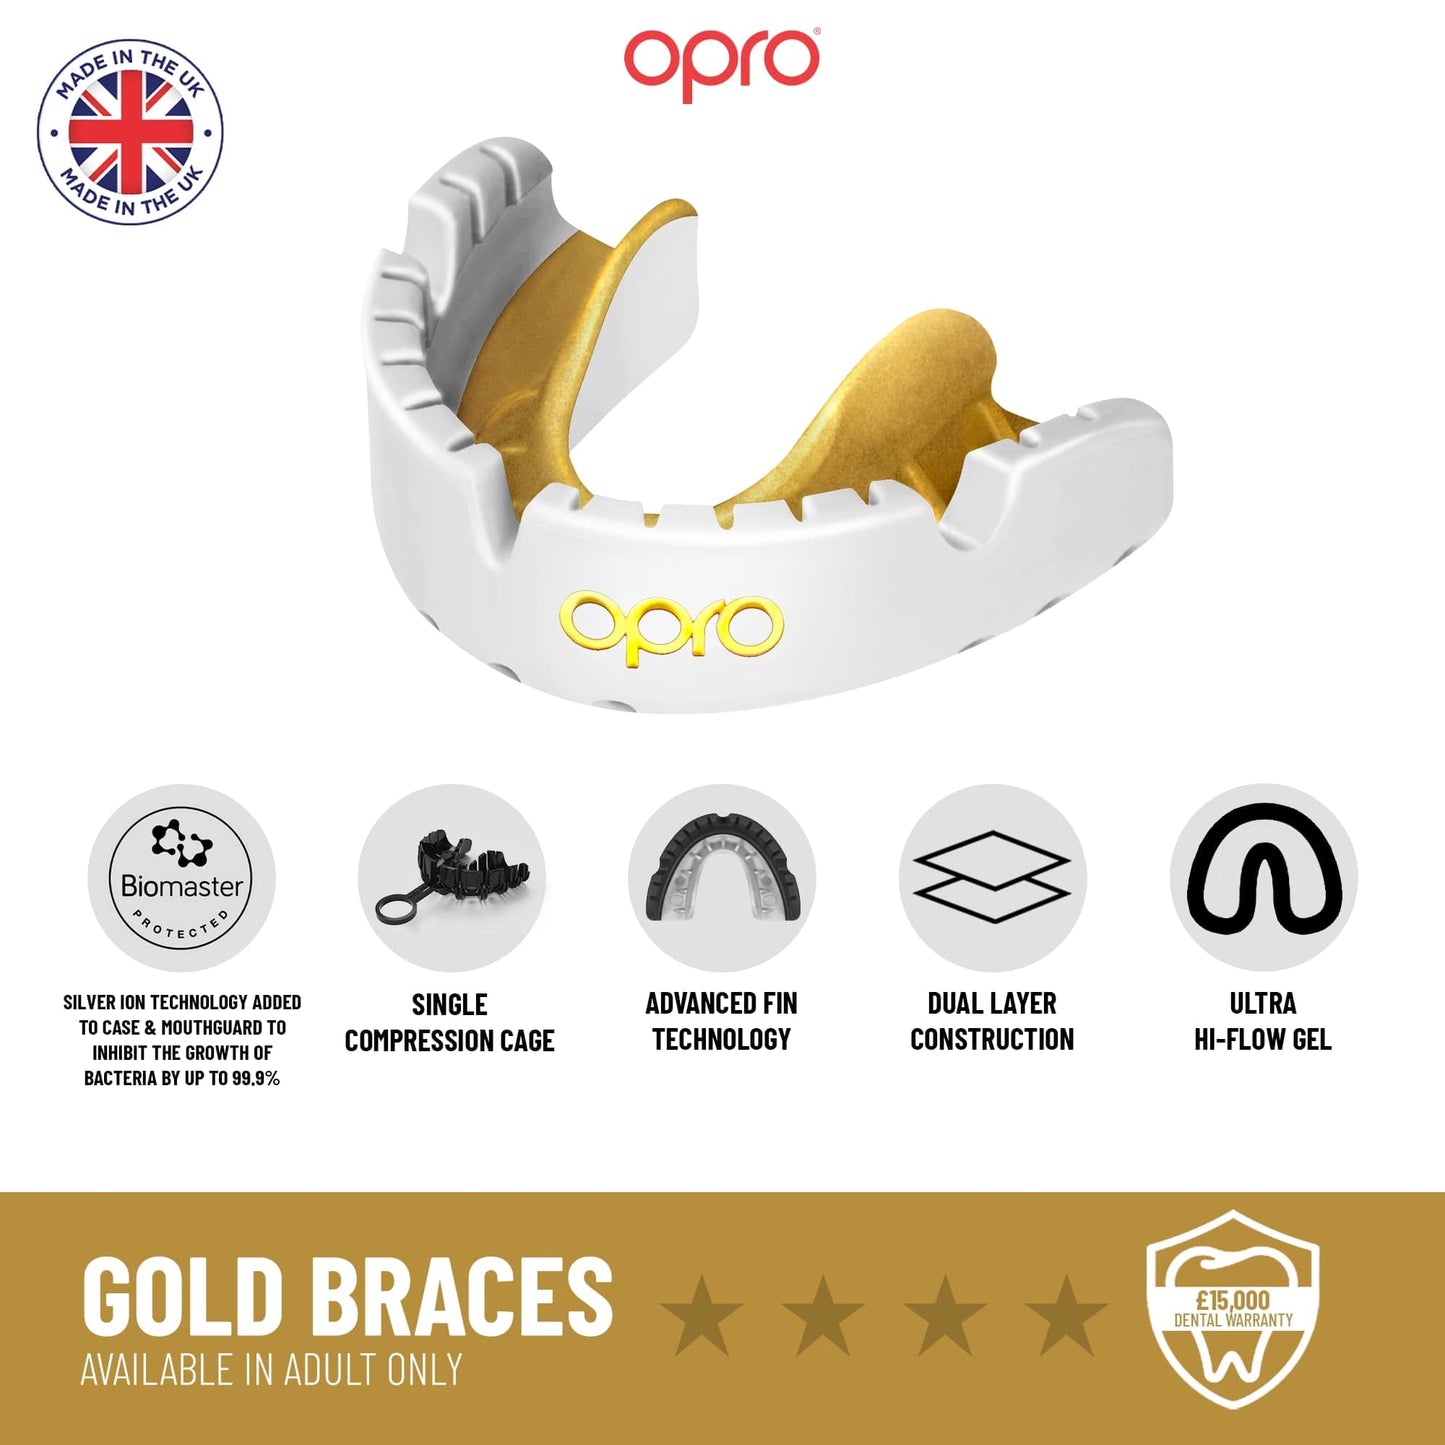 Opro New Gold Level Mouthguard for Braces, Adults Sports Mouth Guard, Featuring Revolutionary Fitting Technology for Boxing, Lacrosse, MMA, Martial Arts, Hockey, and All Contact Sports (White)